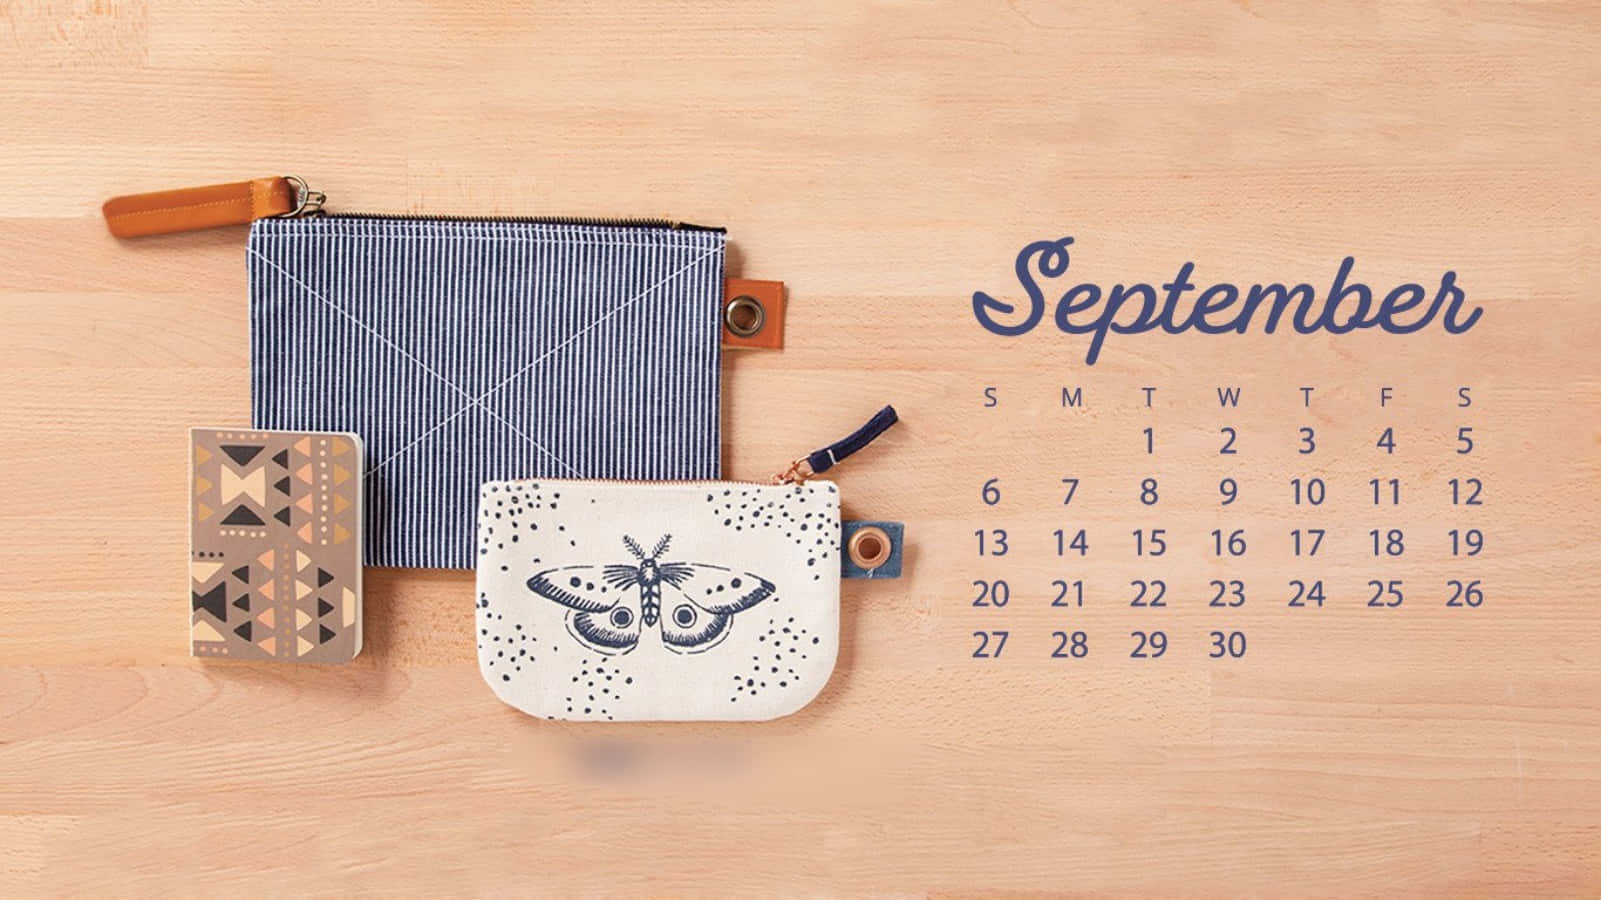 Stay organized and on time with this traditional desk/wall calendar.